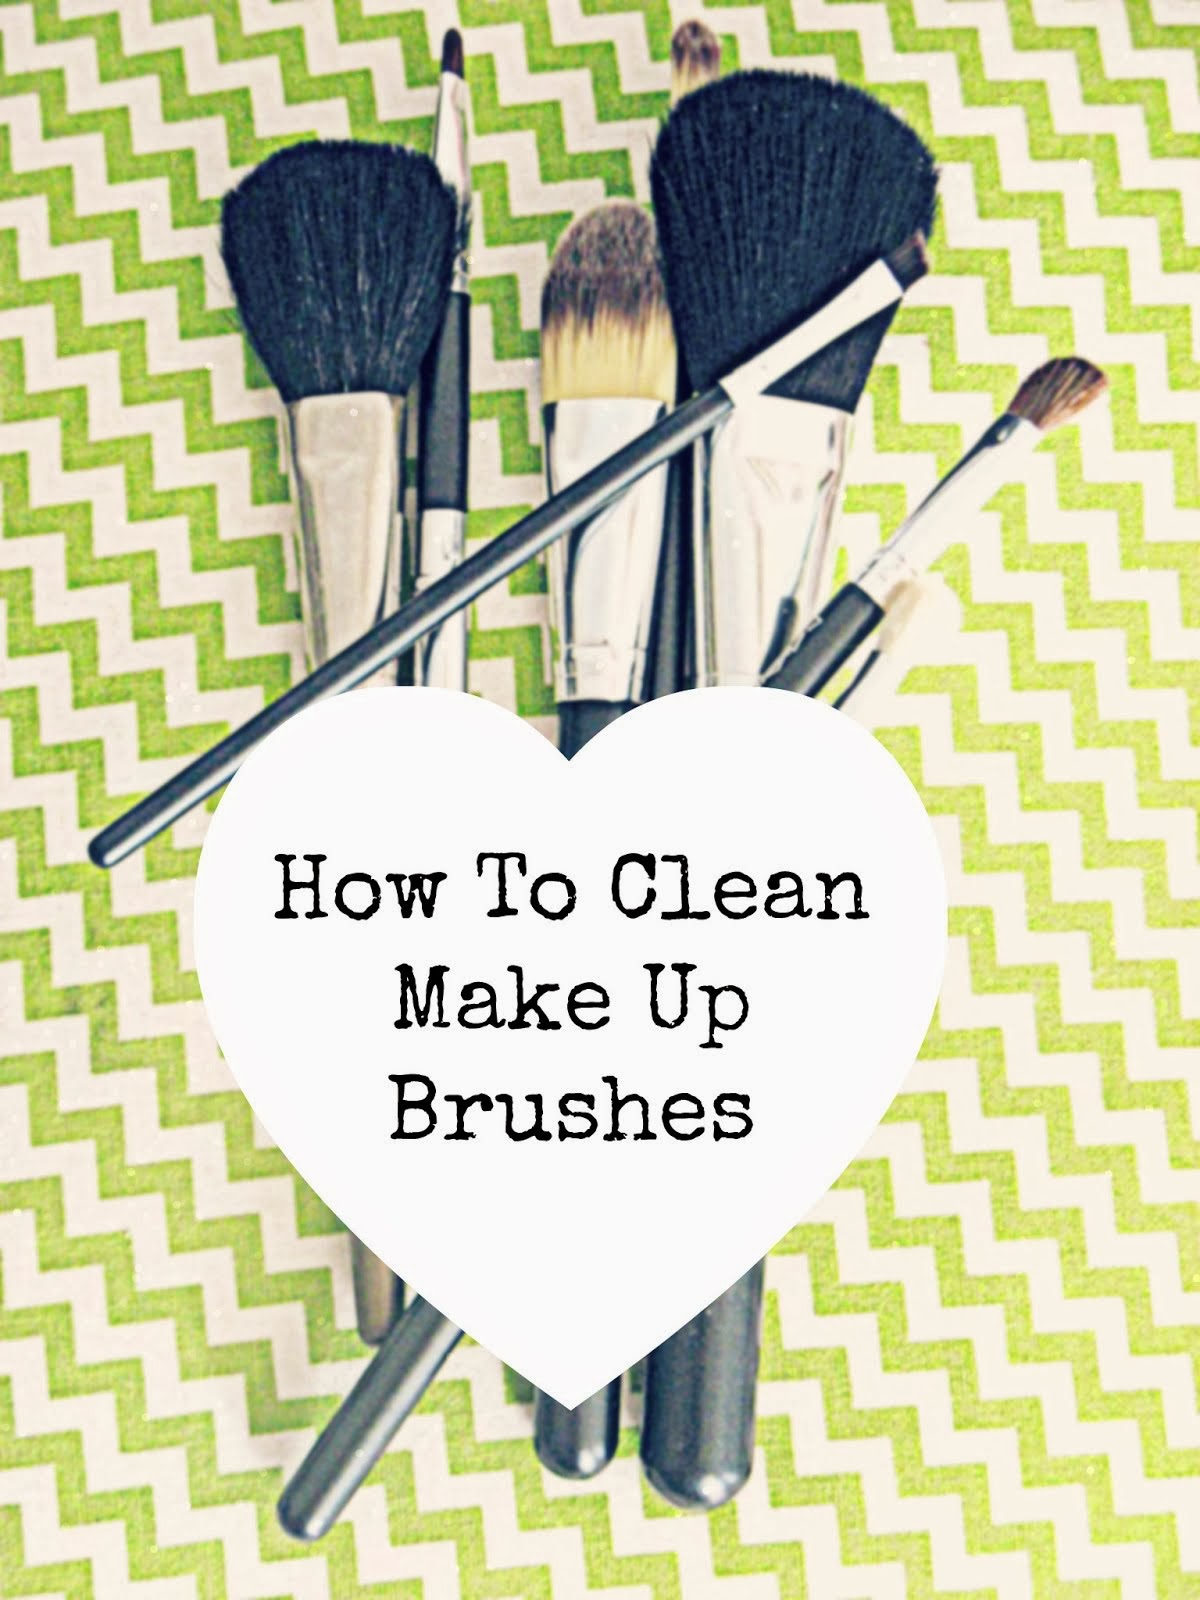 Cleaning Make Up Brushes